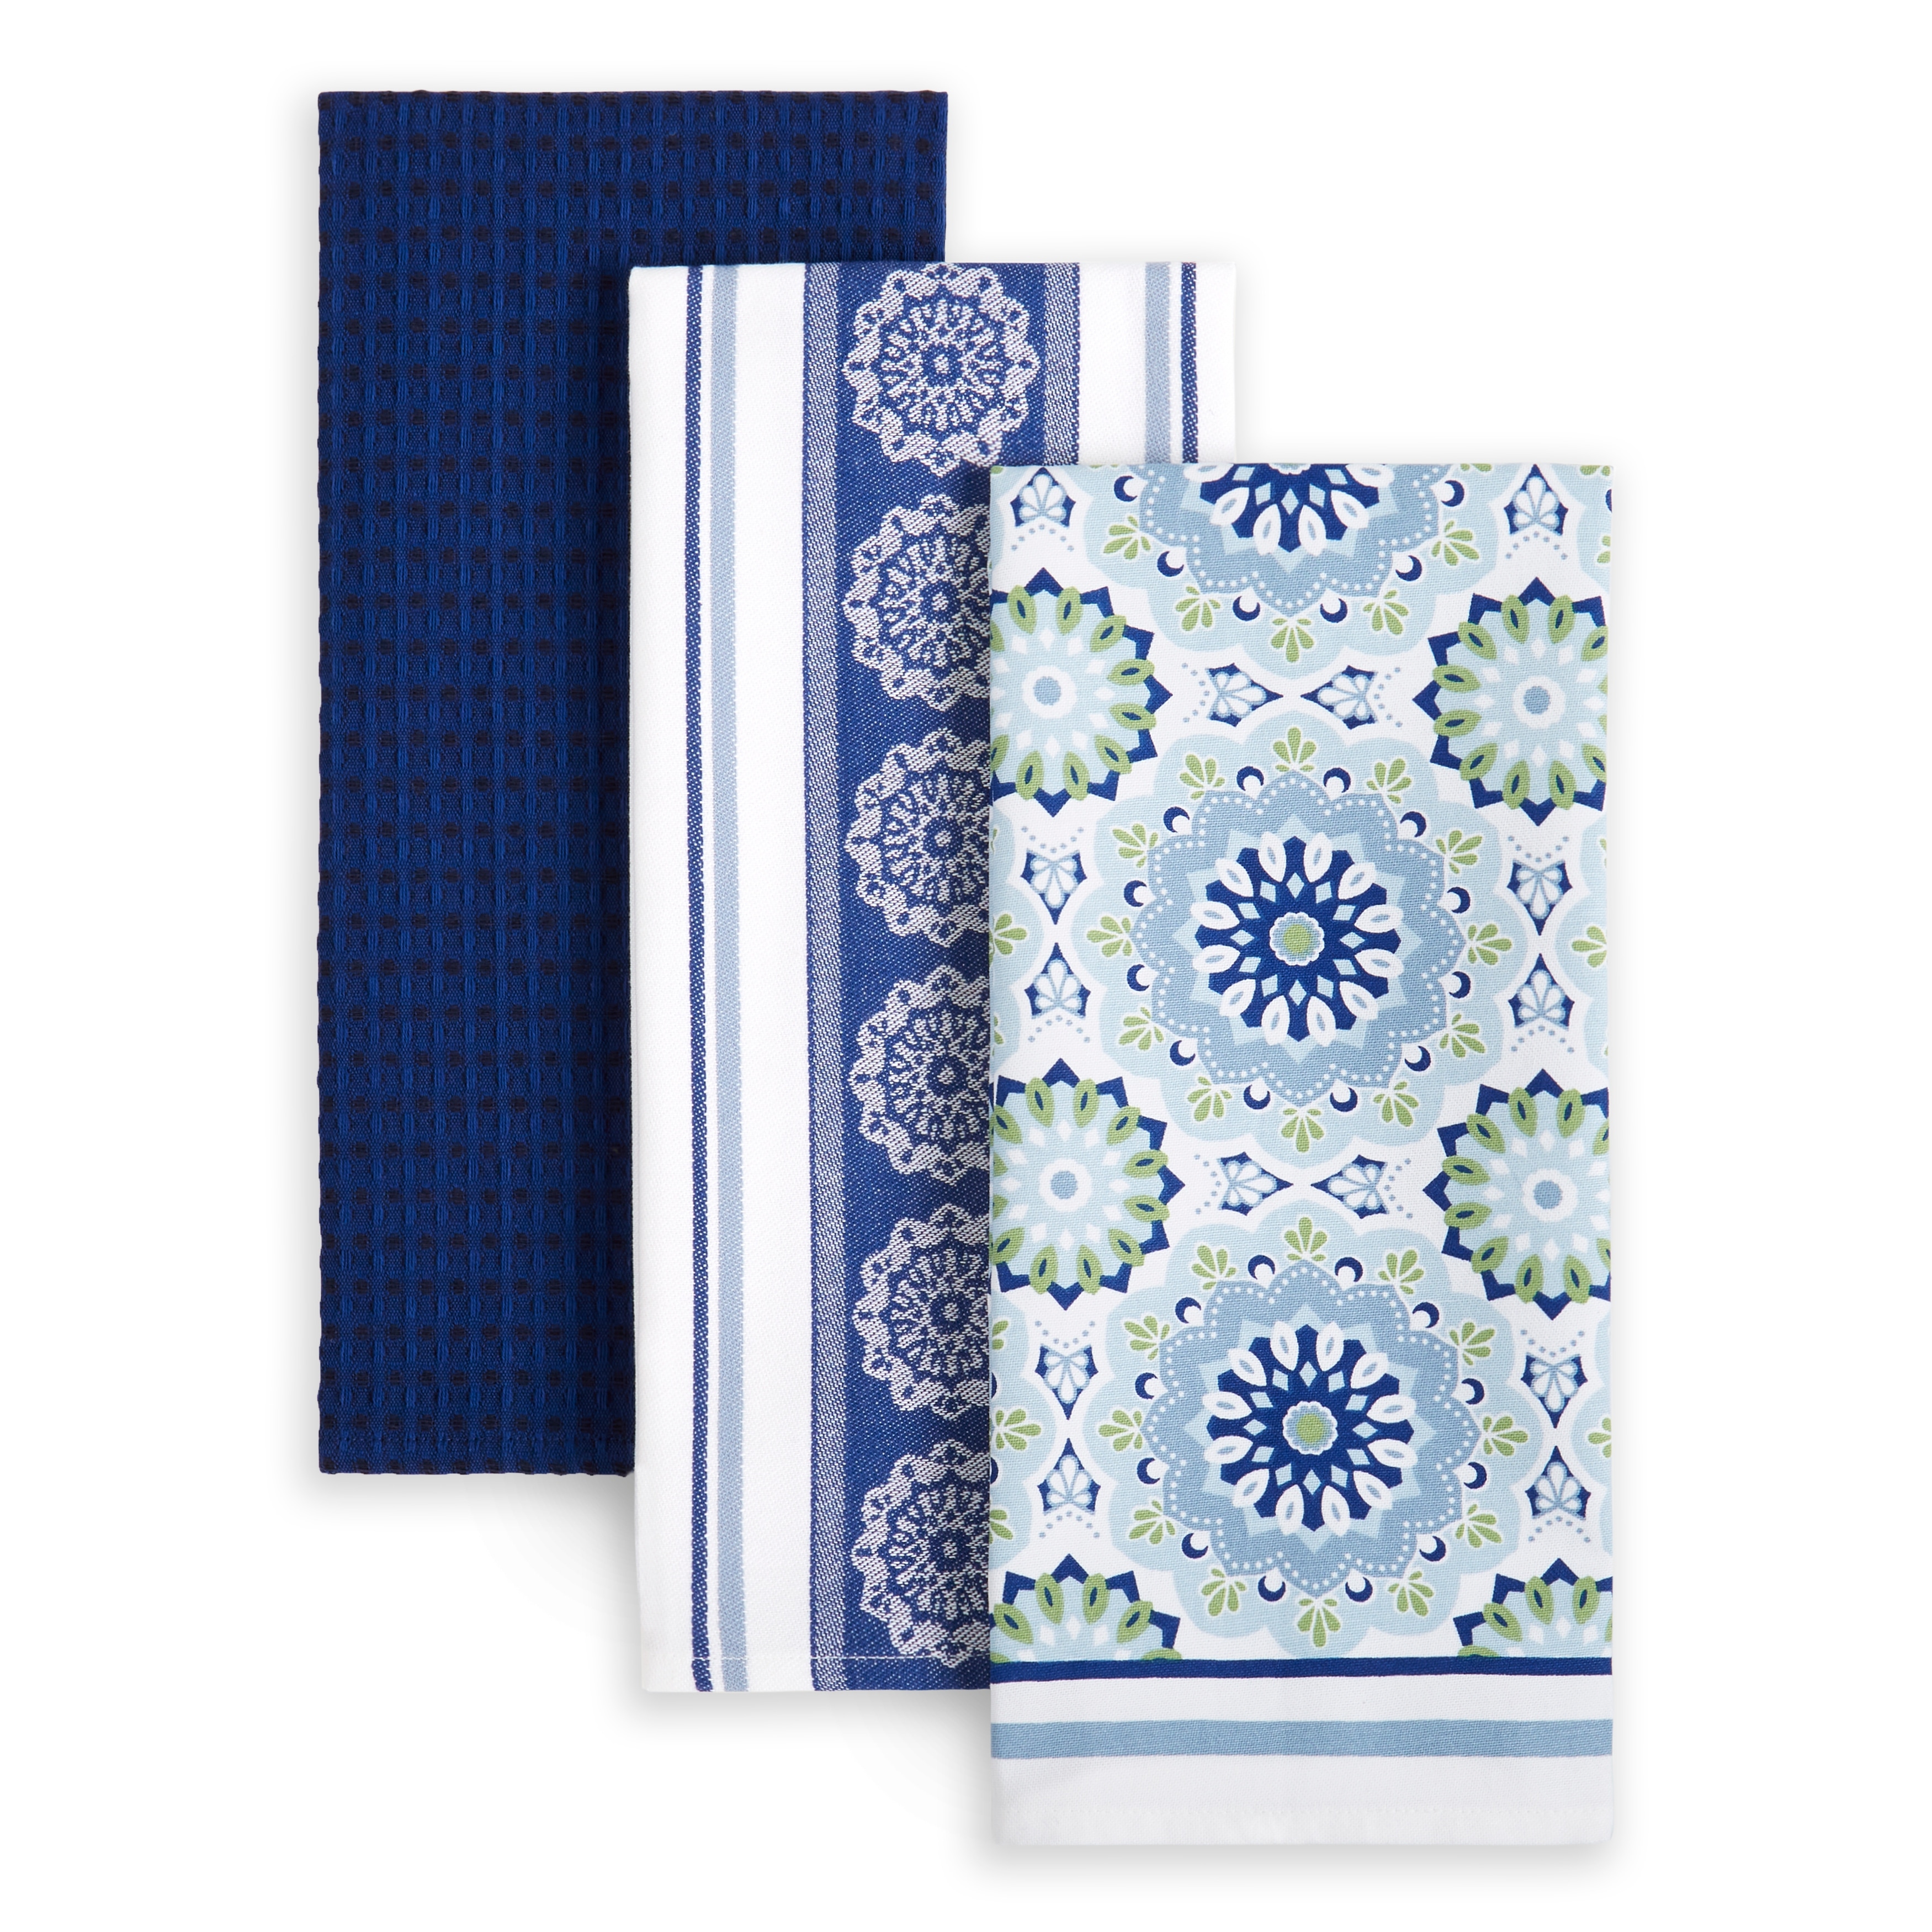 https://ak1.ostkcdn.com/images/products/is/images/direct/a608ce4f191ee4d130aa28d710e1382cba5d10d6/Martha-Stewart-Printed-Medallion-Kitchen-Towel-3-Pack-Set.jpg